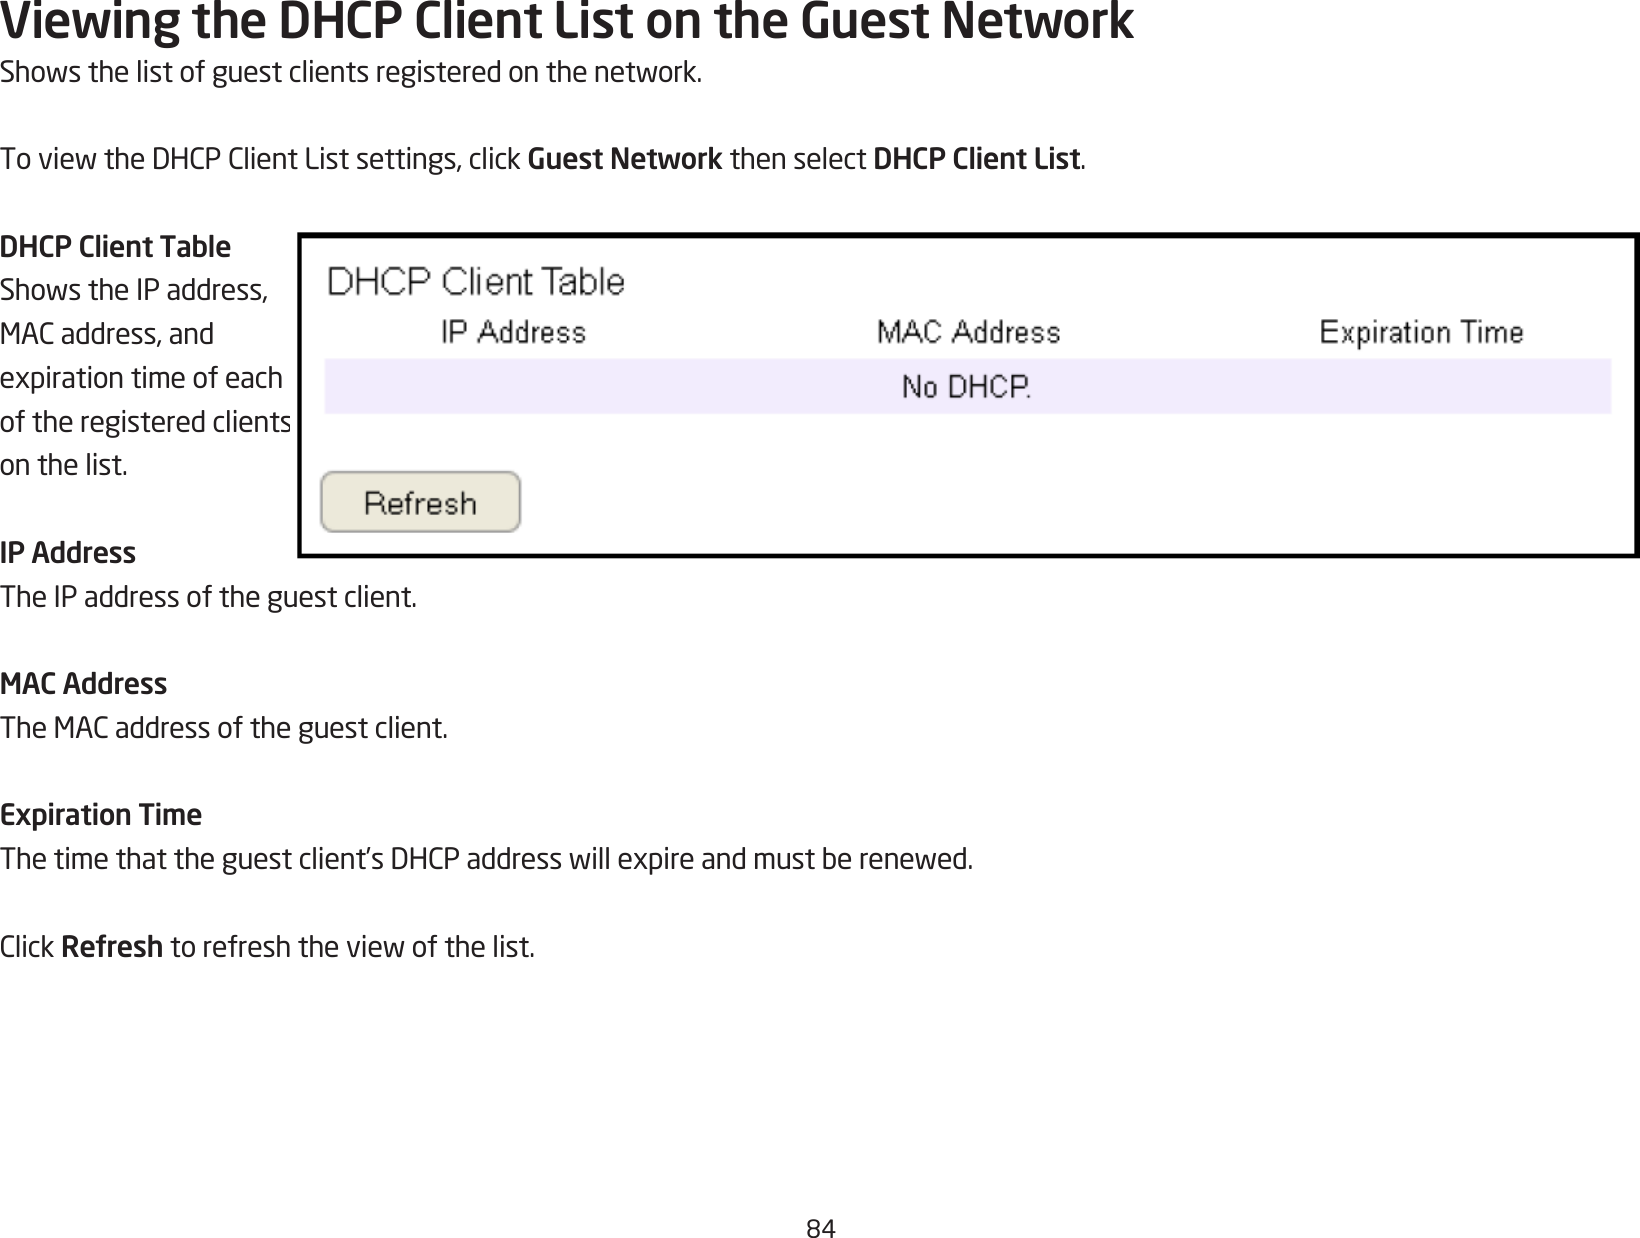 84Viewing the DHCP Client List on the Guest NetworkShowsthelistofguestclientsregisteredonthenetwork.ToviewtheDHCPClientListsettings,clickGuest Network then select DHCP Client List.DHCP Client TableShowstheIPaddress,MACaddress,andexpirationtimeofeachof the registered clients on the list.IP AddressThe IP address of the guest client.MAC AddressTheMACaddressoftheguestclient.Expiration TimeThetimethattheguestclient’sDHCPaddresswillexpireandmustberenewed.ClickRefreshtorefreshtheviewofthelist.